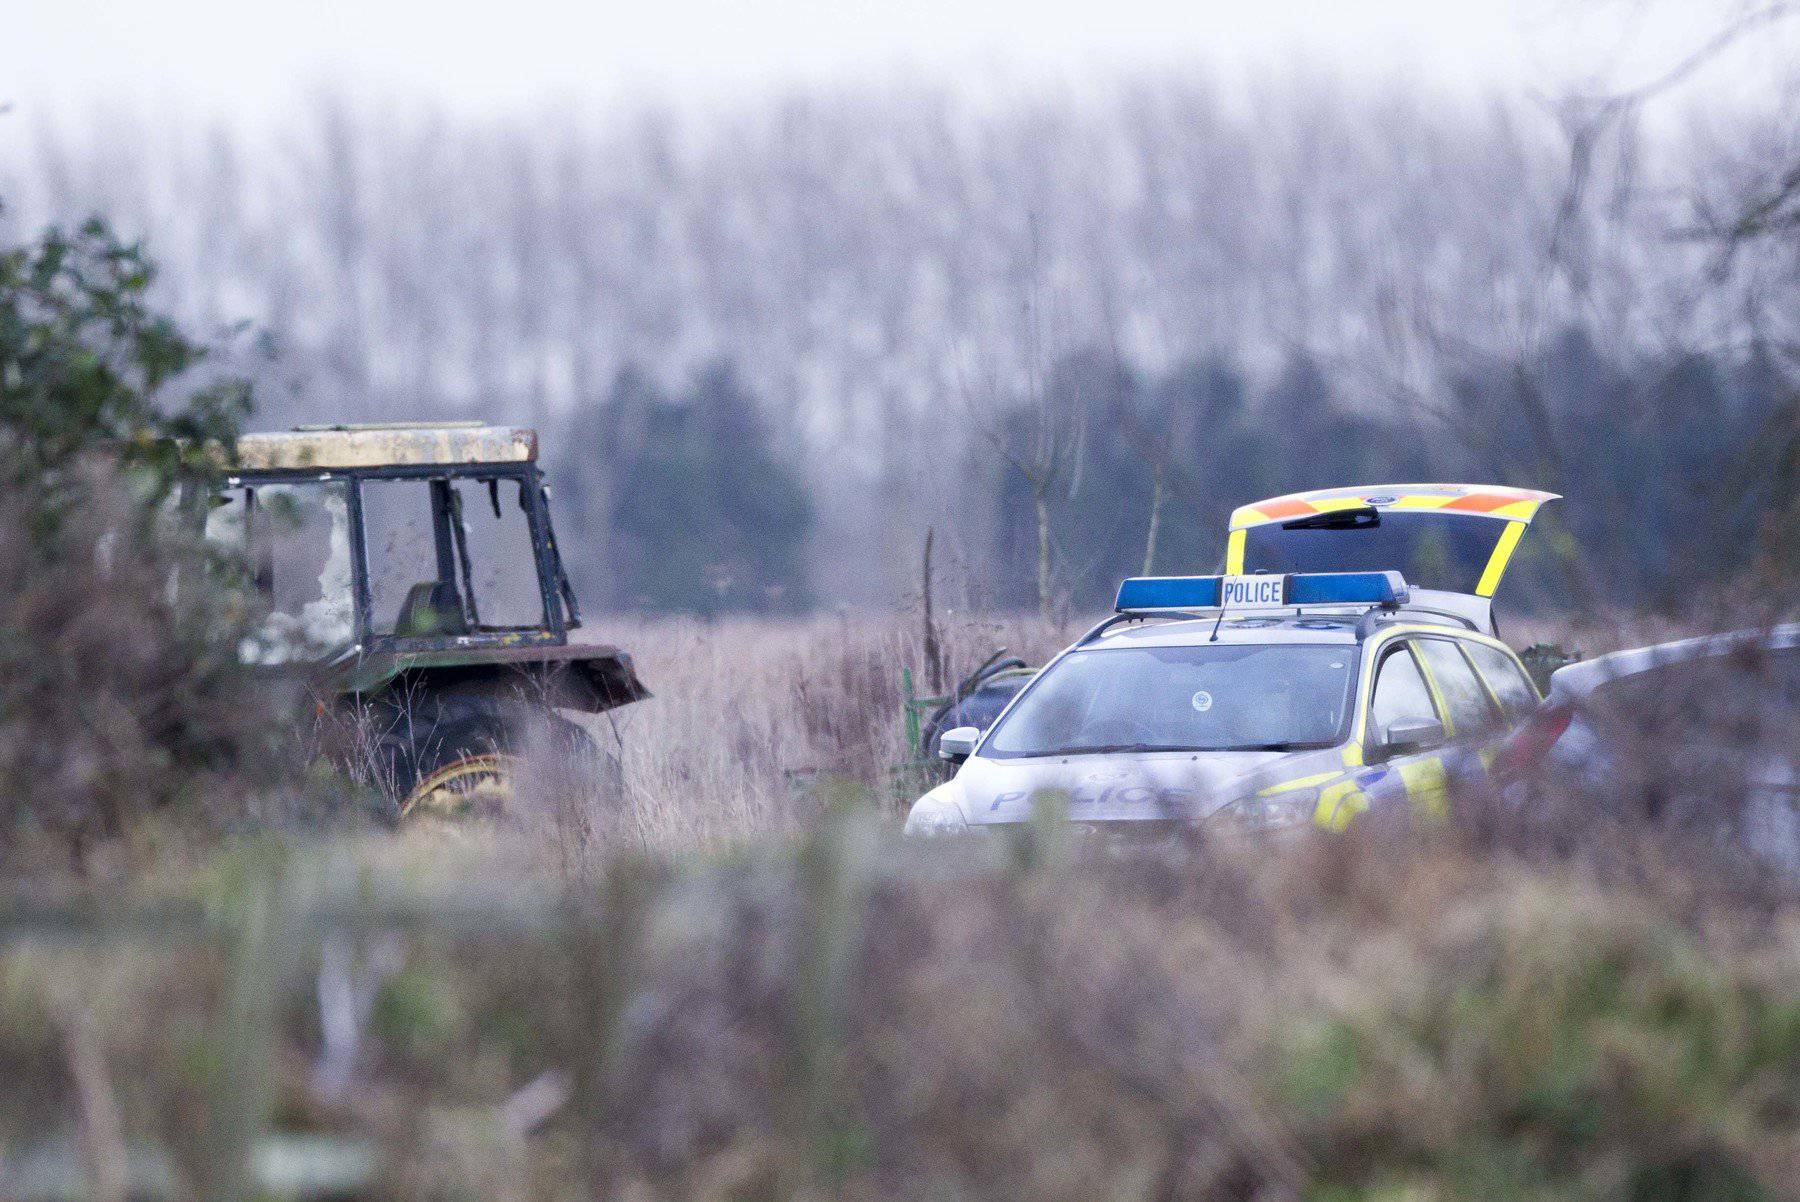 Police search Tony Martin's property after he is arrested on suspicion of firearms offences, Emneth, Norfolk, Britain - 31 Dec 2015